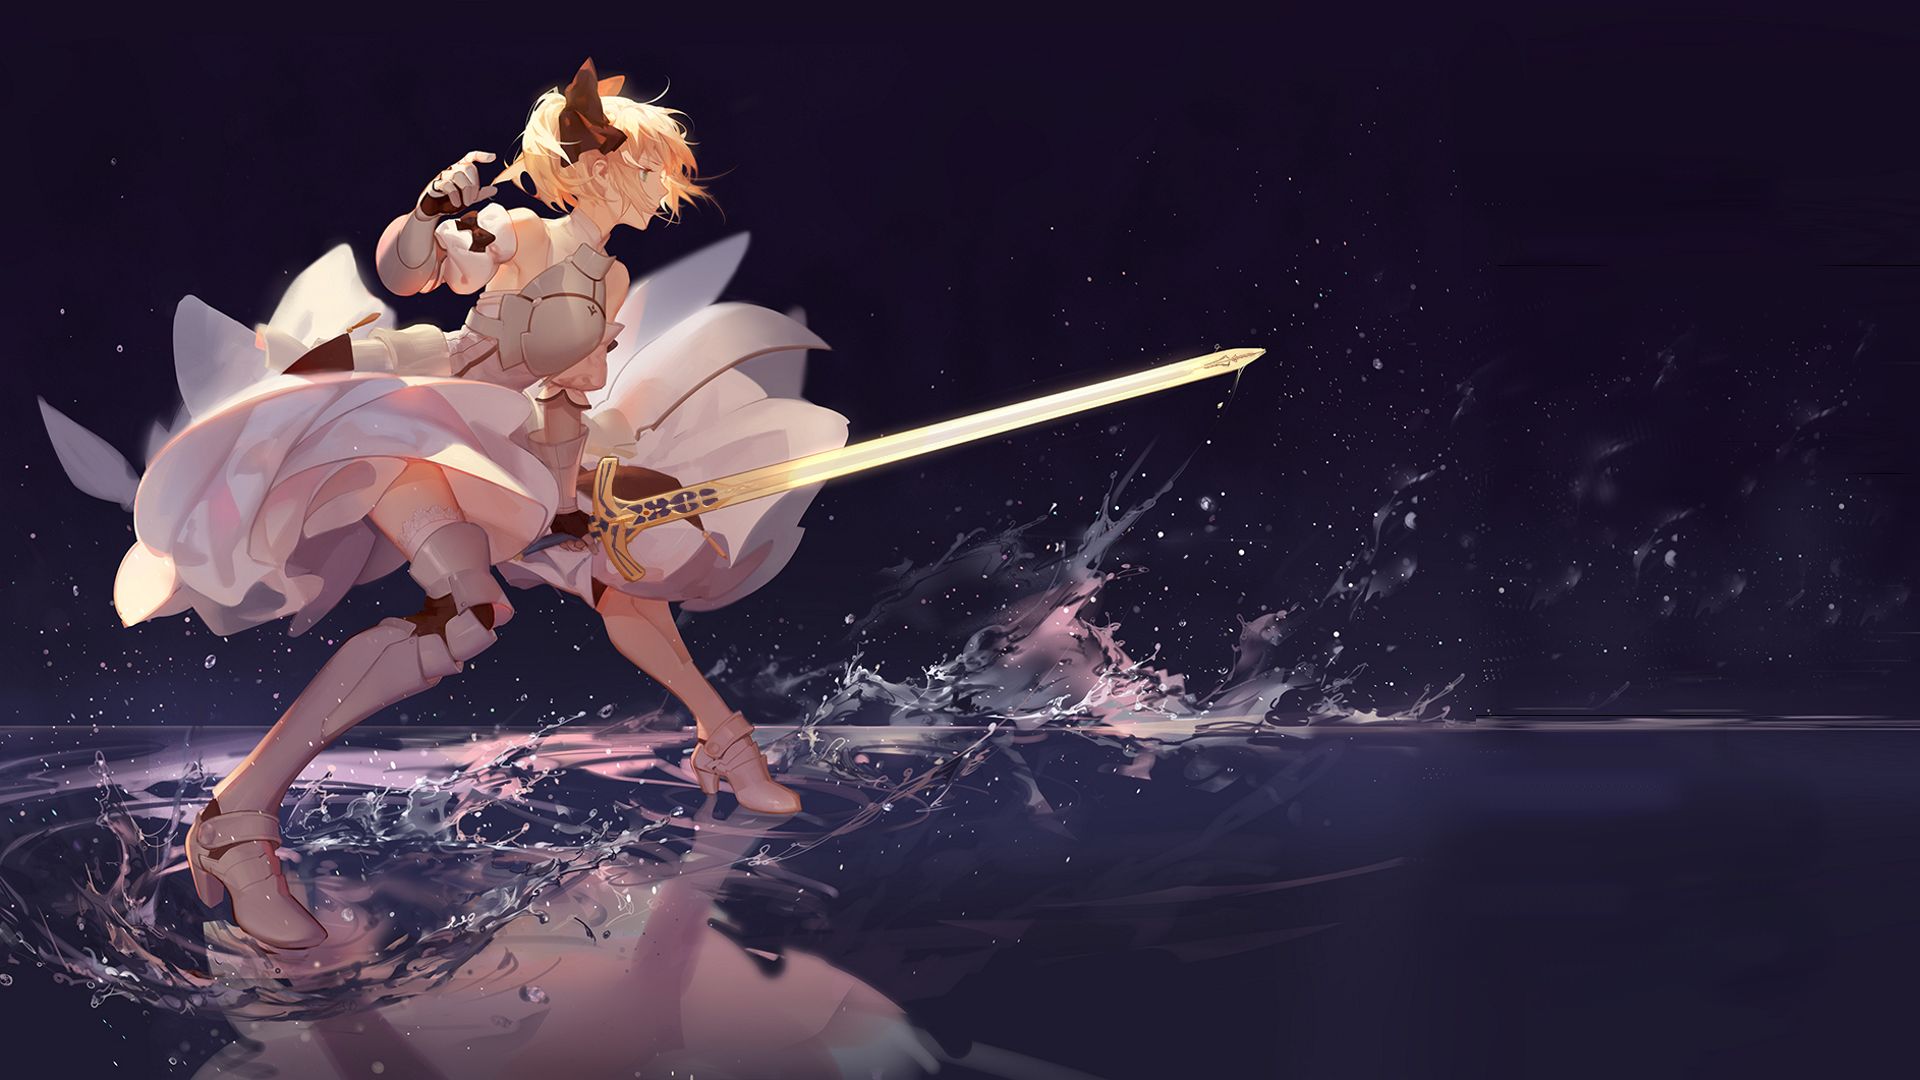 saber (fate series), fate series, anime, fate/stay night, saber lily